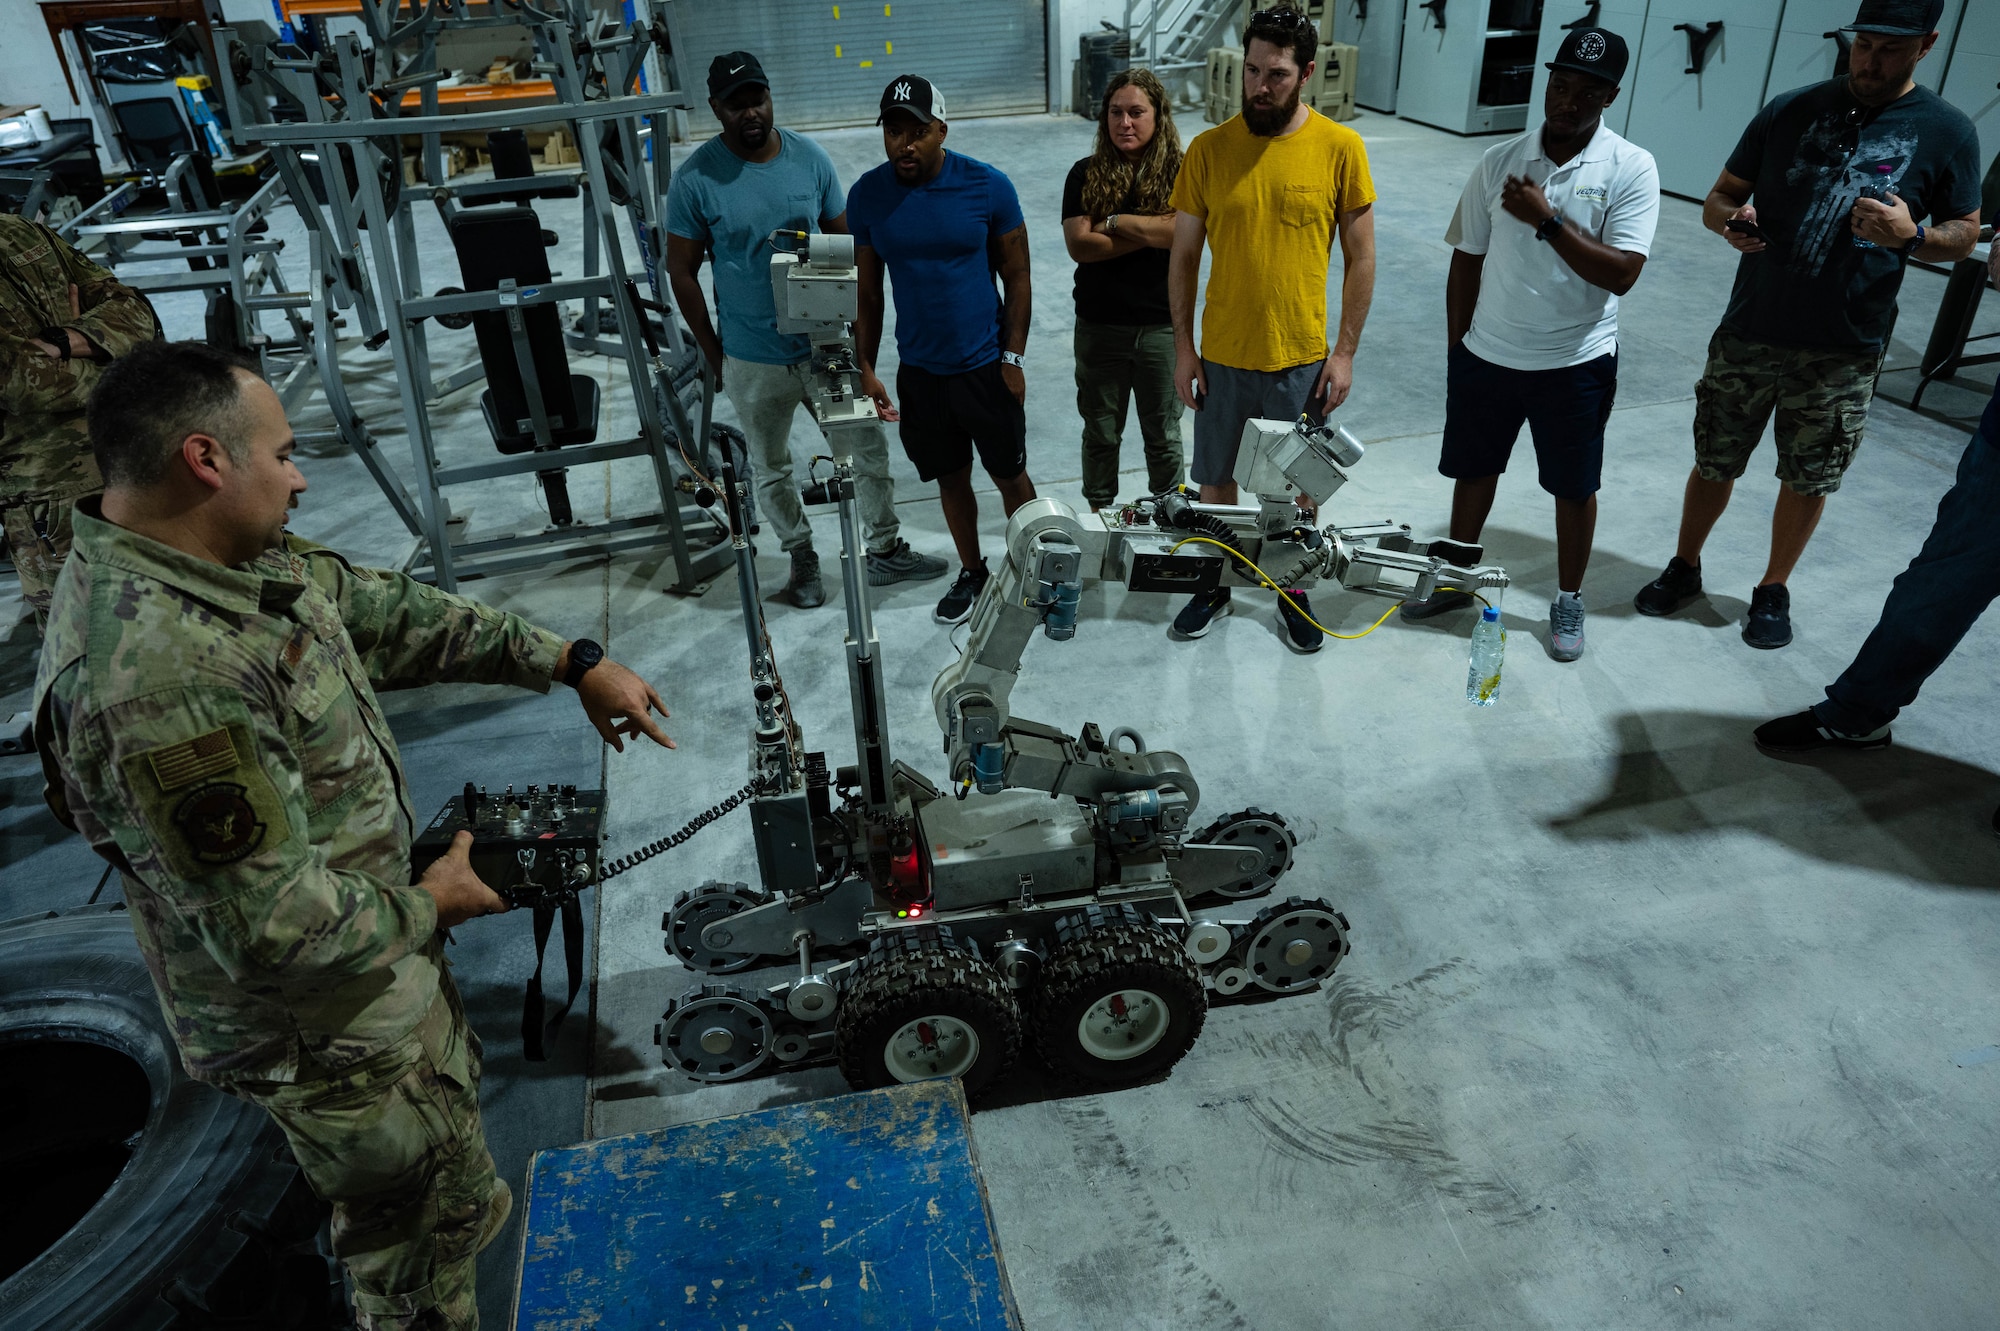 U.S. Air Force Tech Sgt. Jason Calio, an explosive ordinance technician, 379th Expeditionary Civil Engineer Squadron demonstrates using a robot used to disarm explosive devices, AUG 8, 2022 at Al Udeid Air Base, Qatar. Calio said that the water bottle on the end of the robotic arm is a cheap and effective way of helping to neutralize threats. (U.S. Air Force photo by Staff Sgt. Dana Tourtellotte)